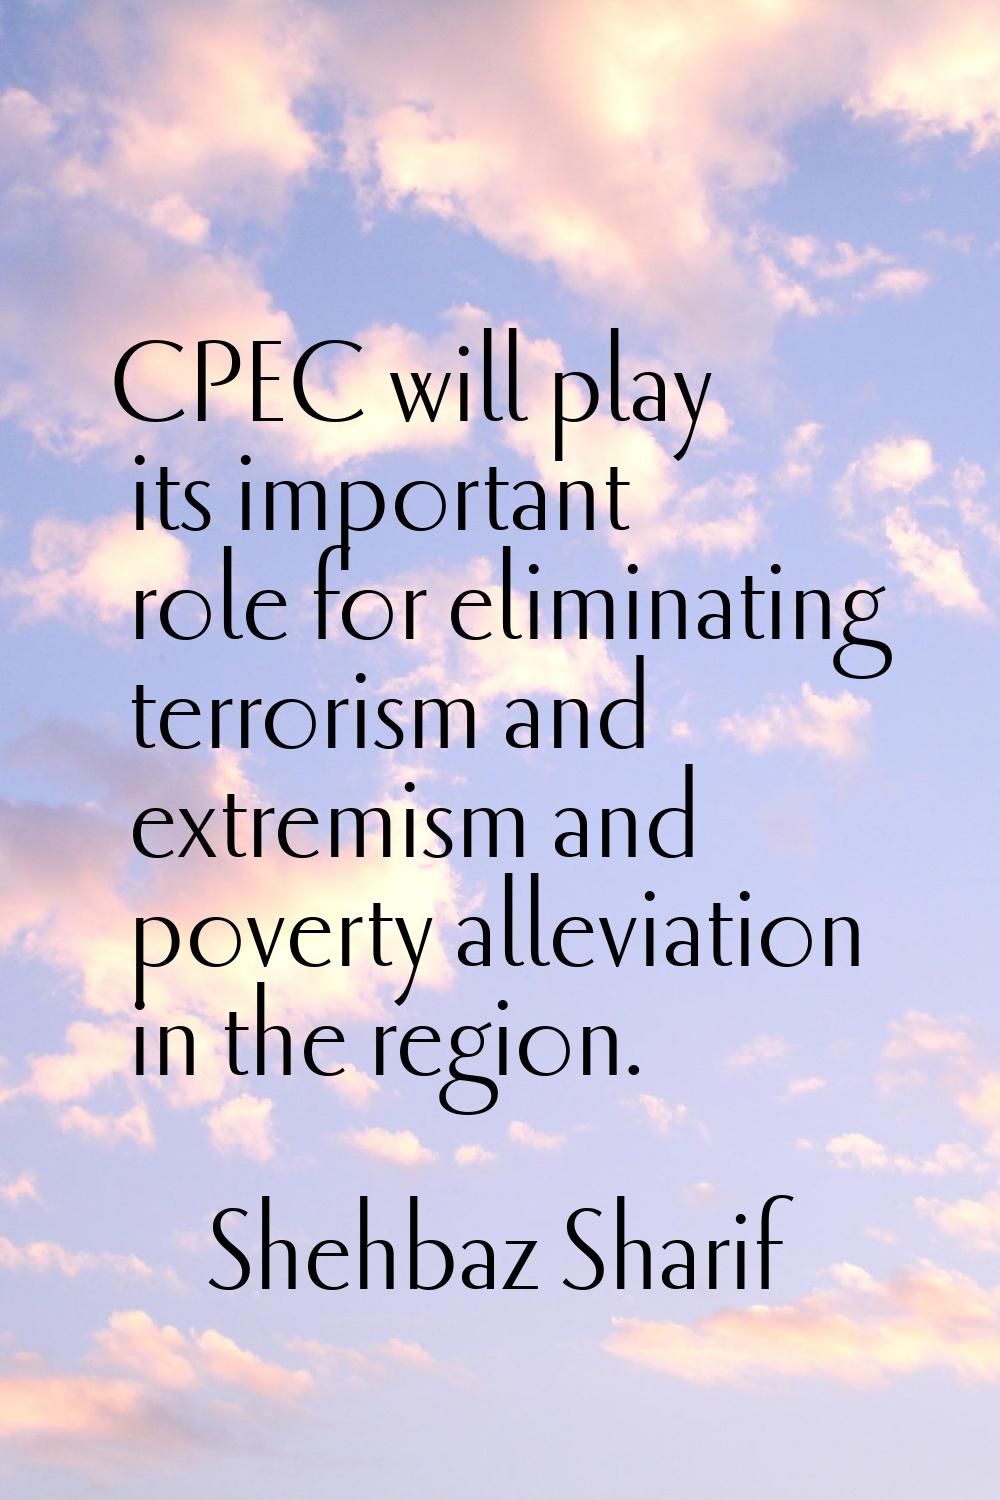 CPEC will play its important role for eliminating terrorism and extremism and poverty alleviation i